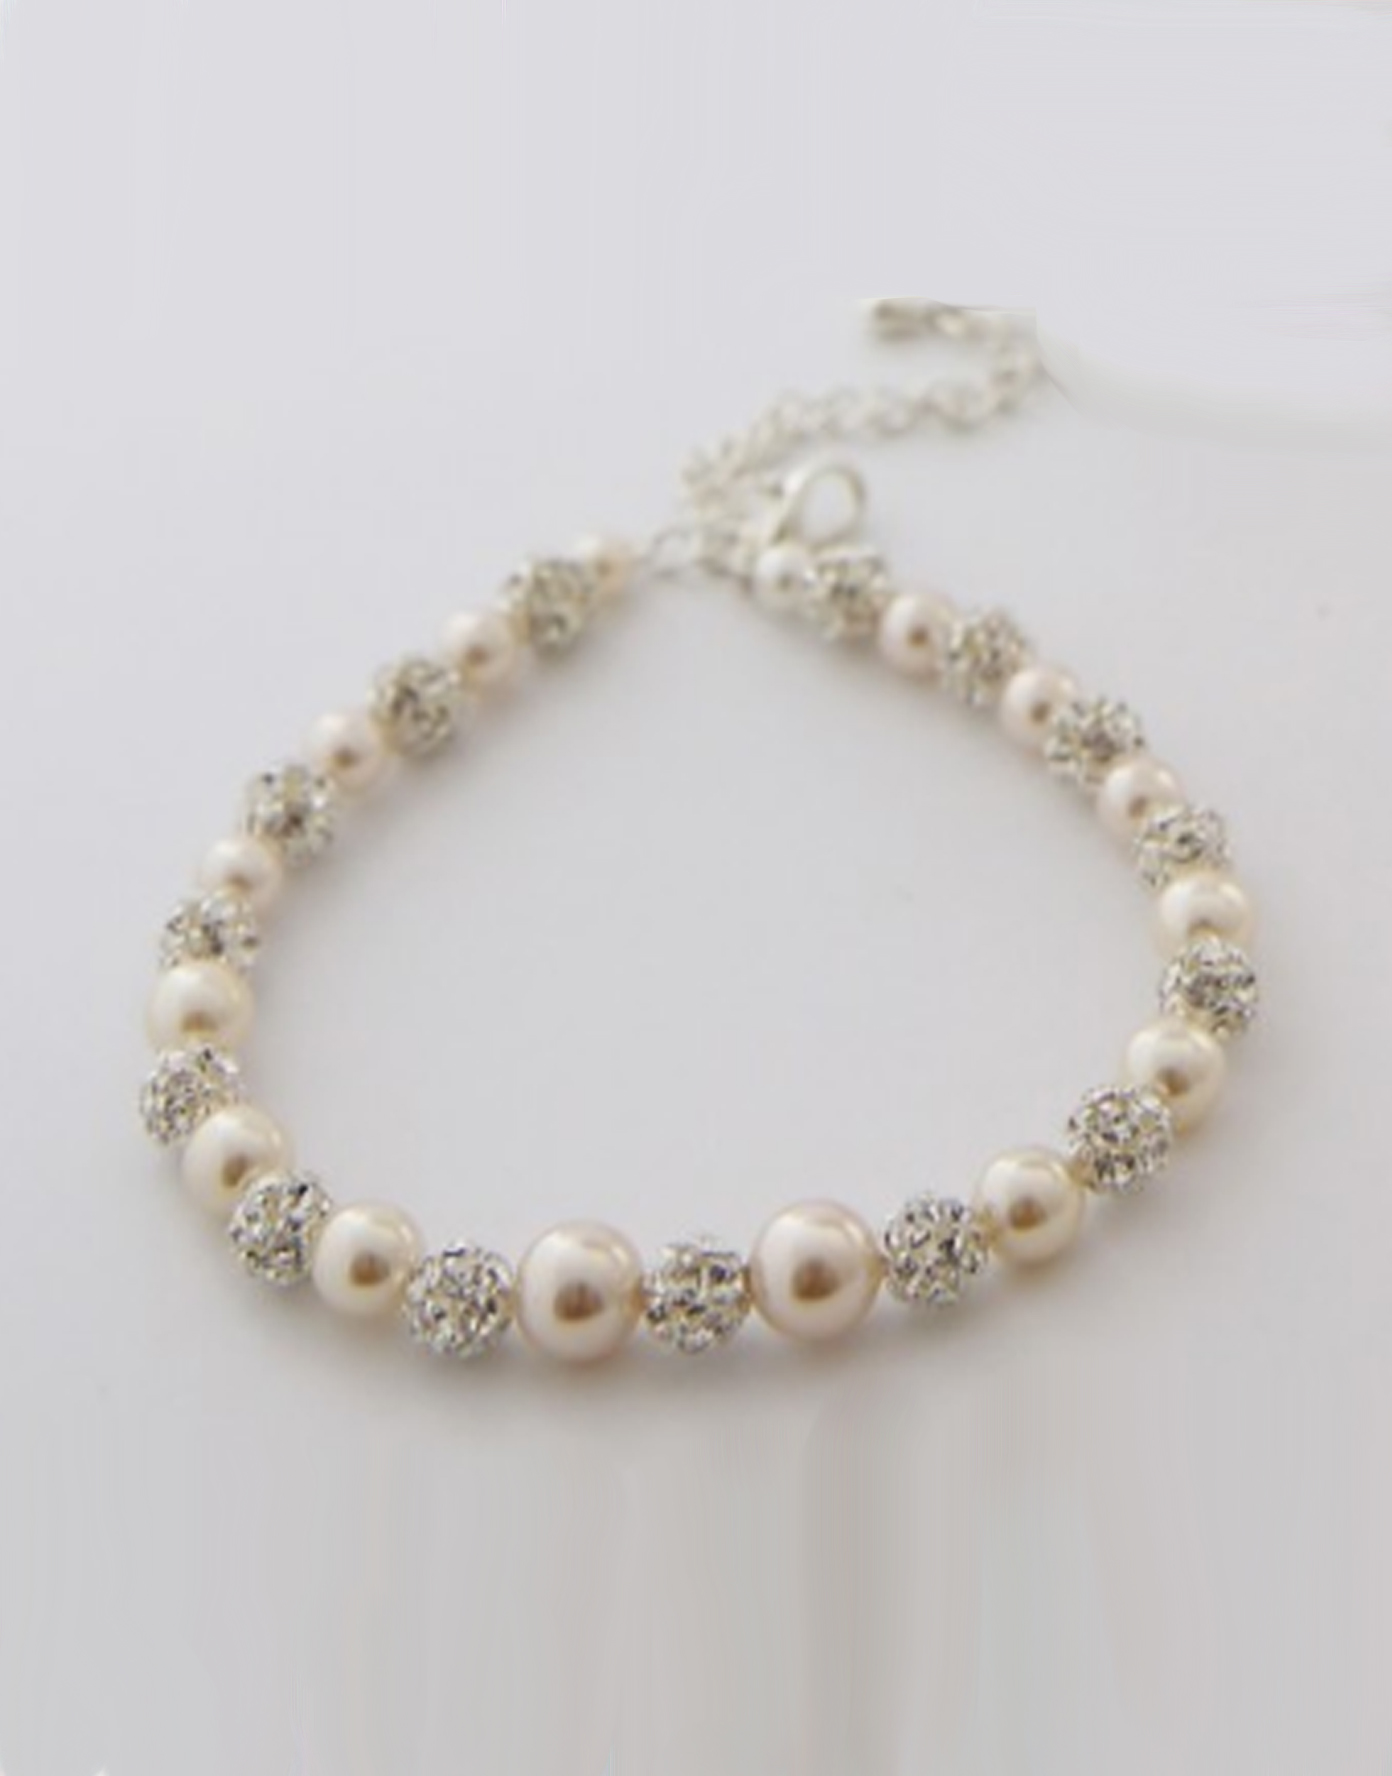 Pearl and Crystal Bracelet